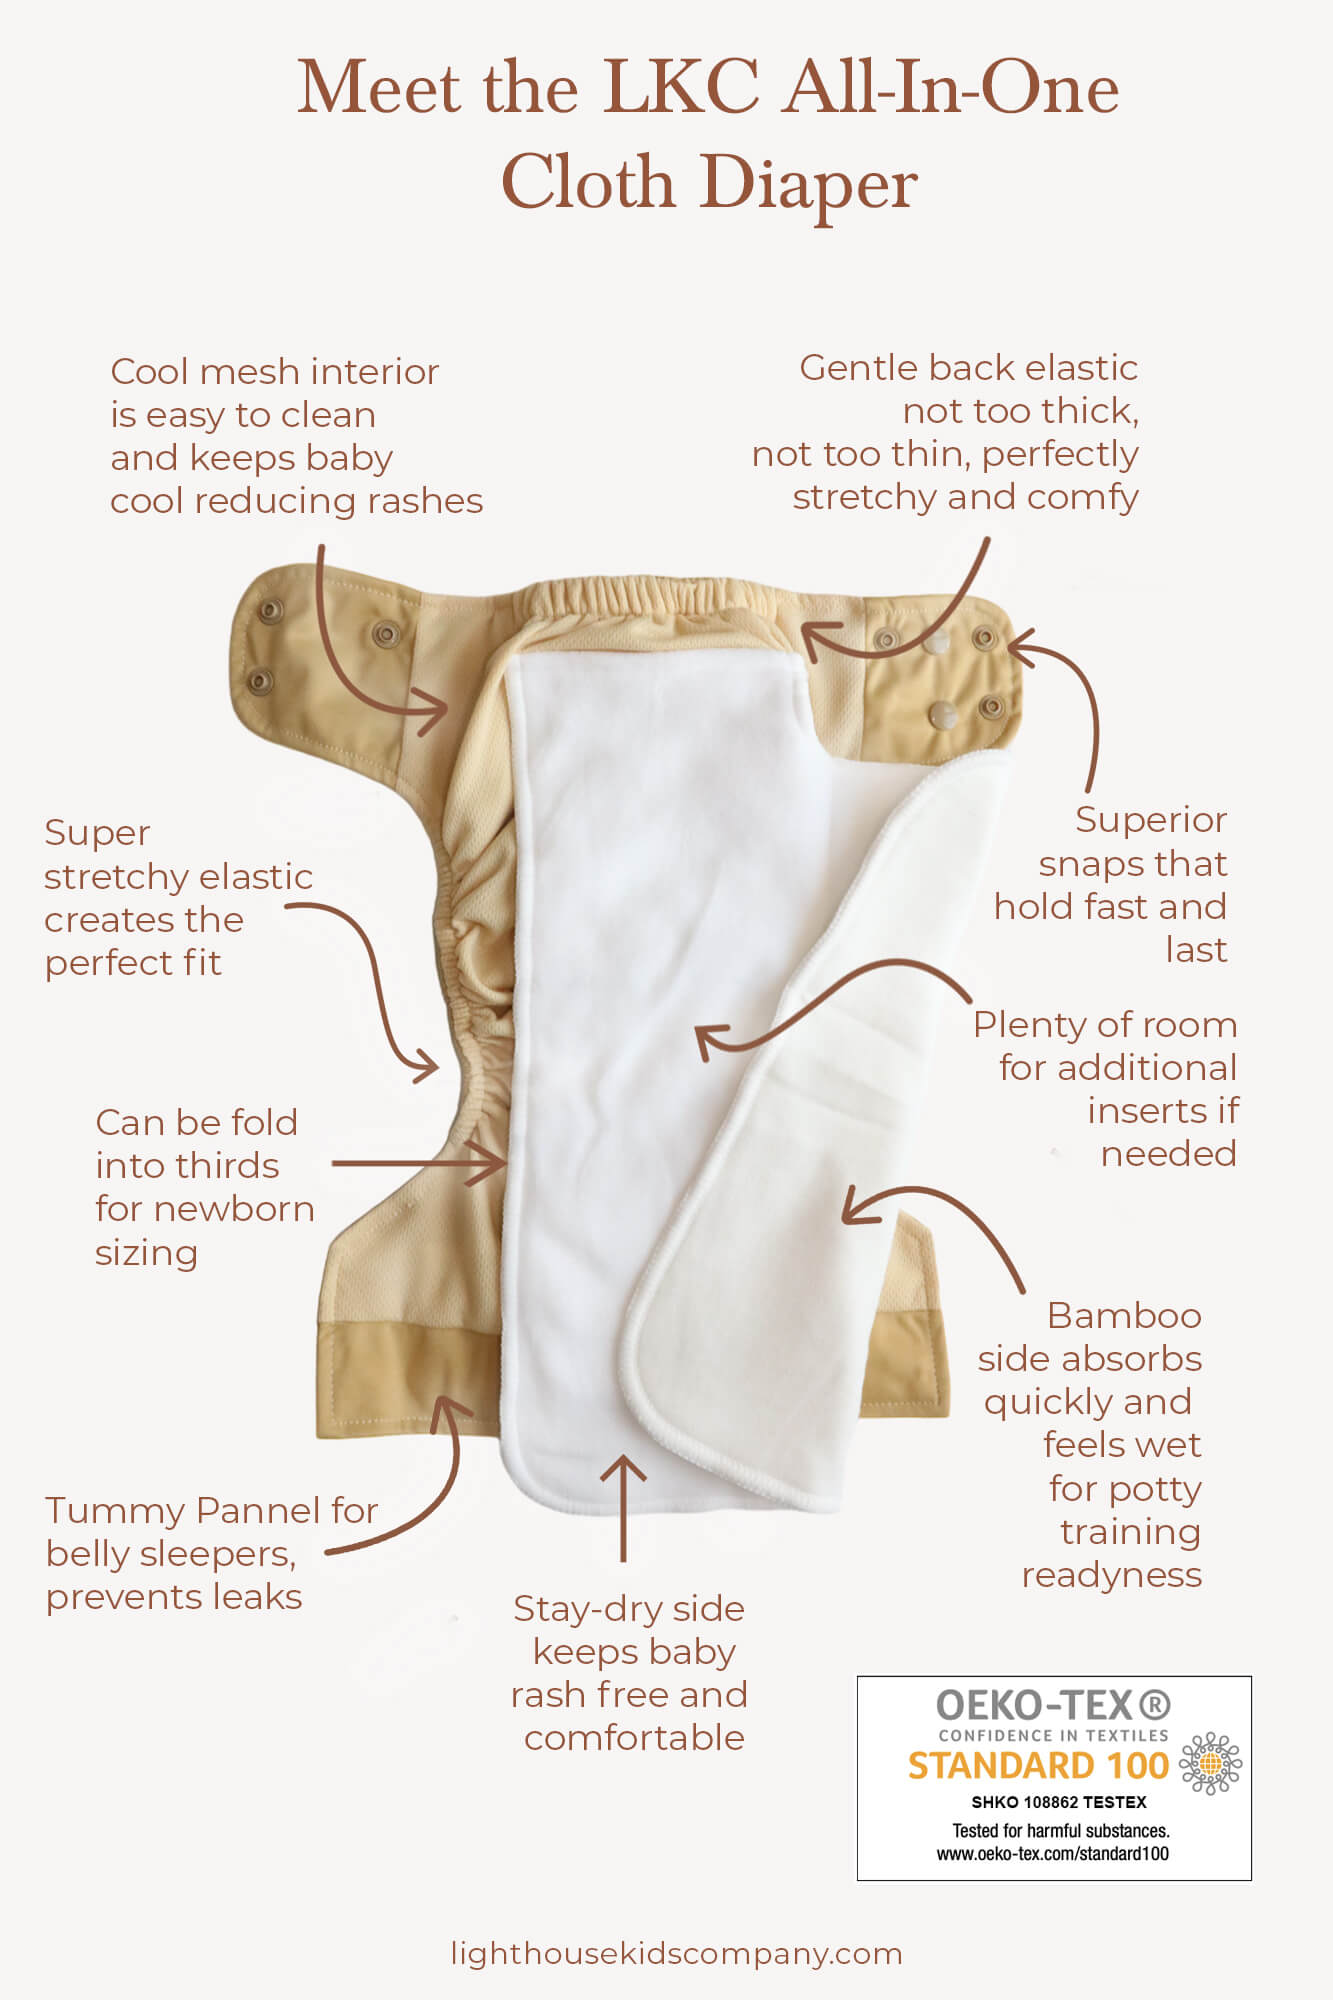 All-In-One Cloth Diaper with AWJ